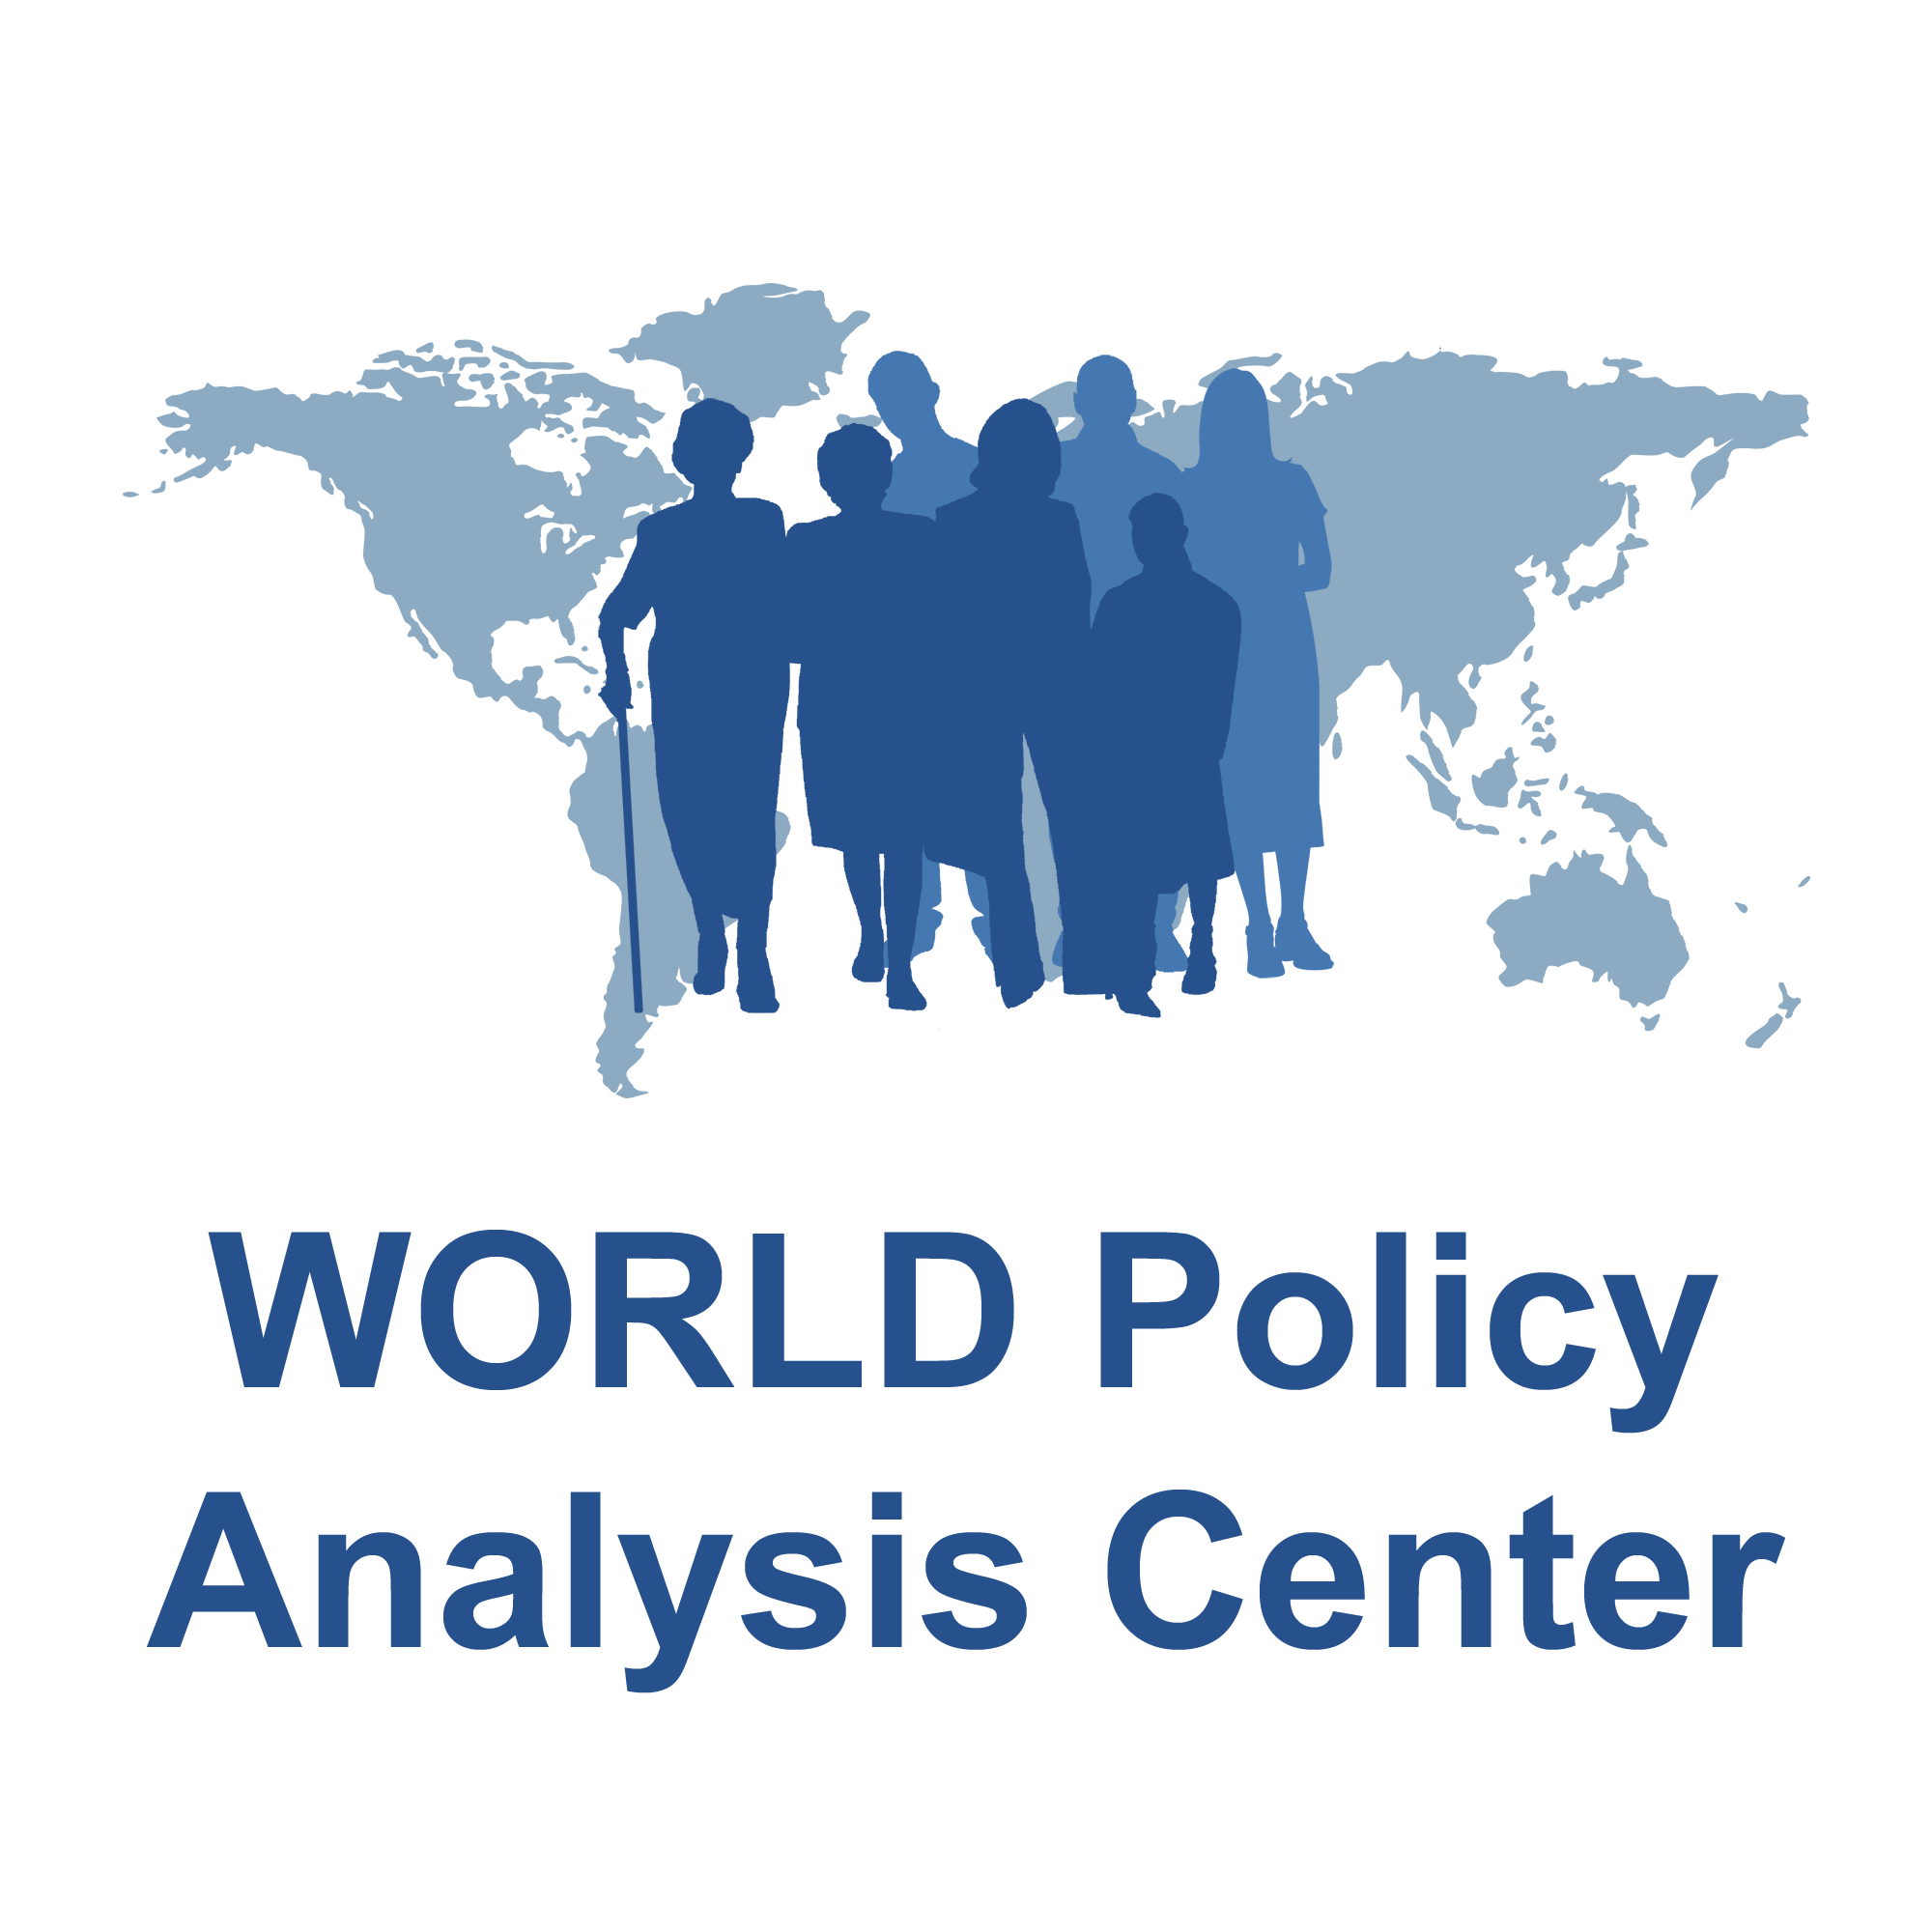 WORLD Policy Analysis Center at the UCLA Fielding School of Public Health